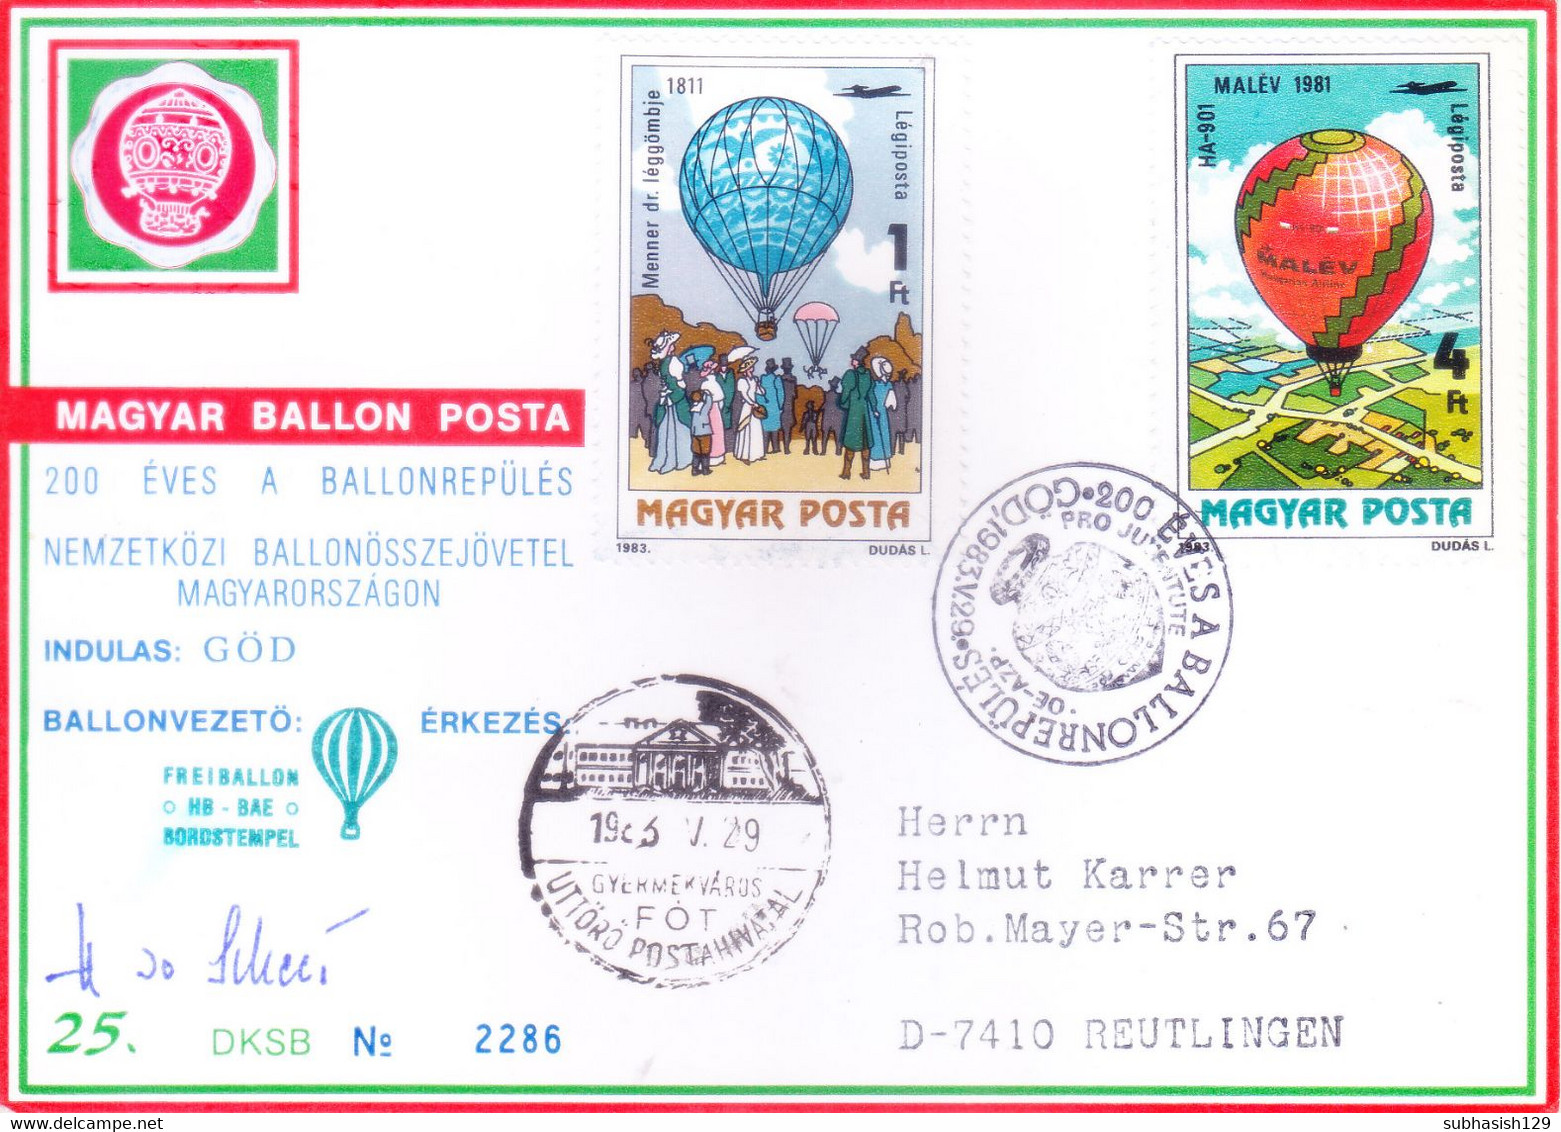 HUNGARY : BALLOON MAIL : YEAR 1983 : SIGNATURE OF PILOT - Covers & Documents